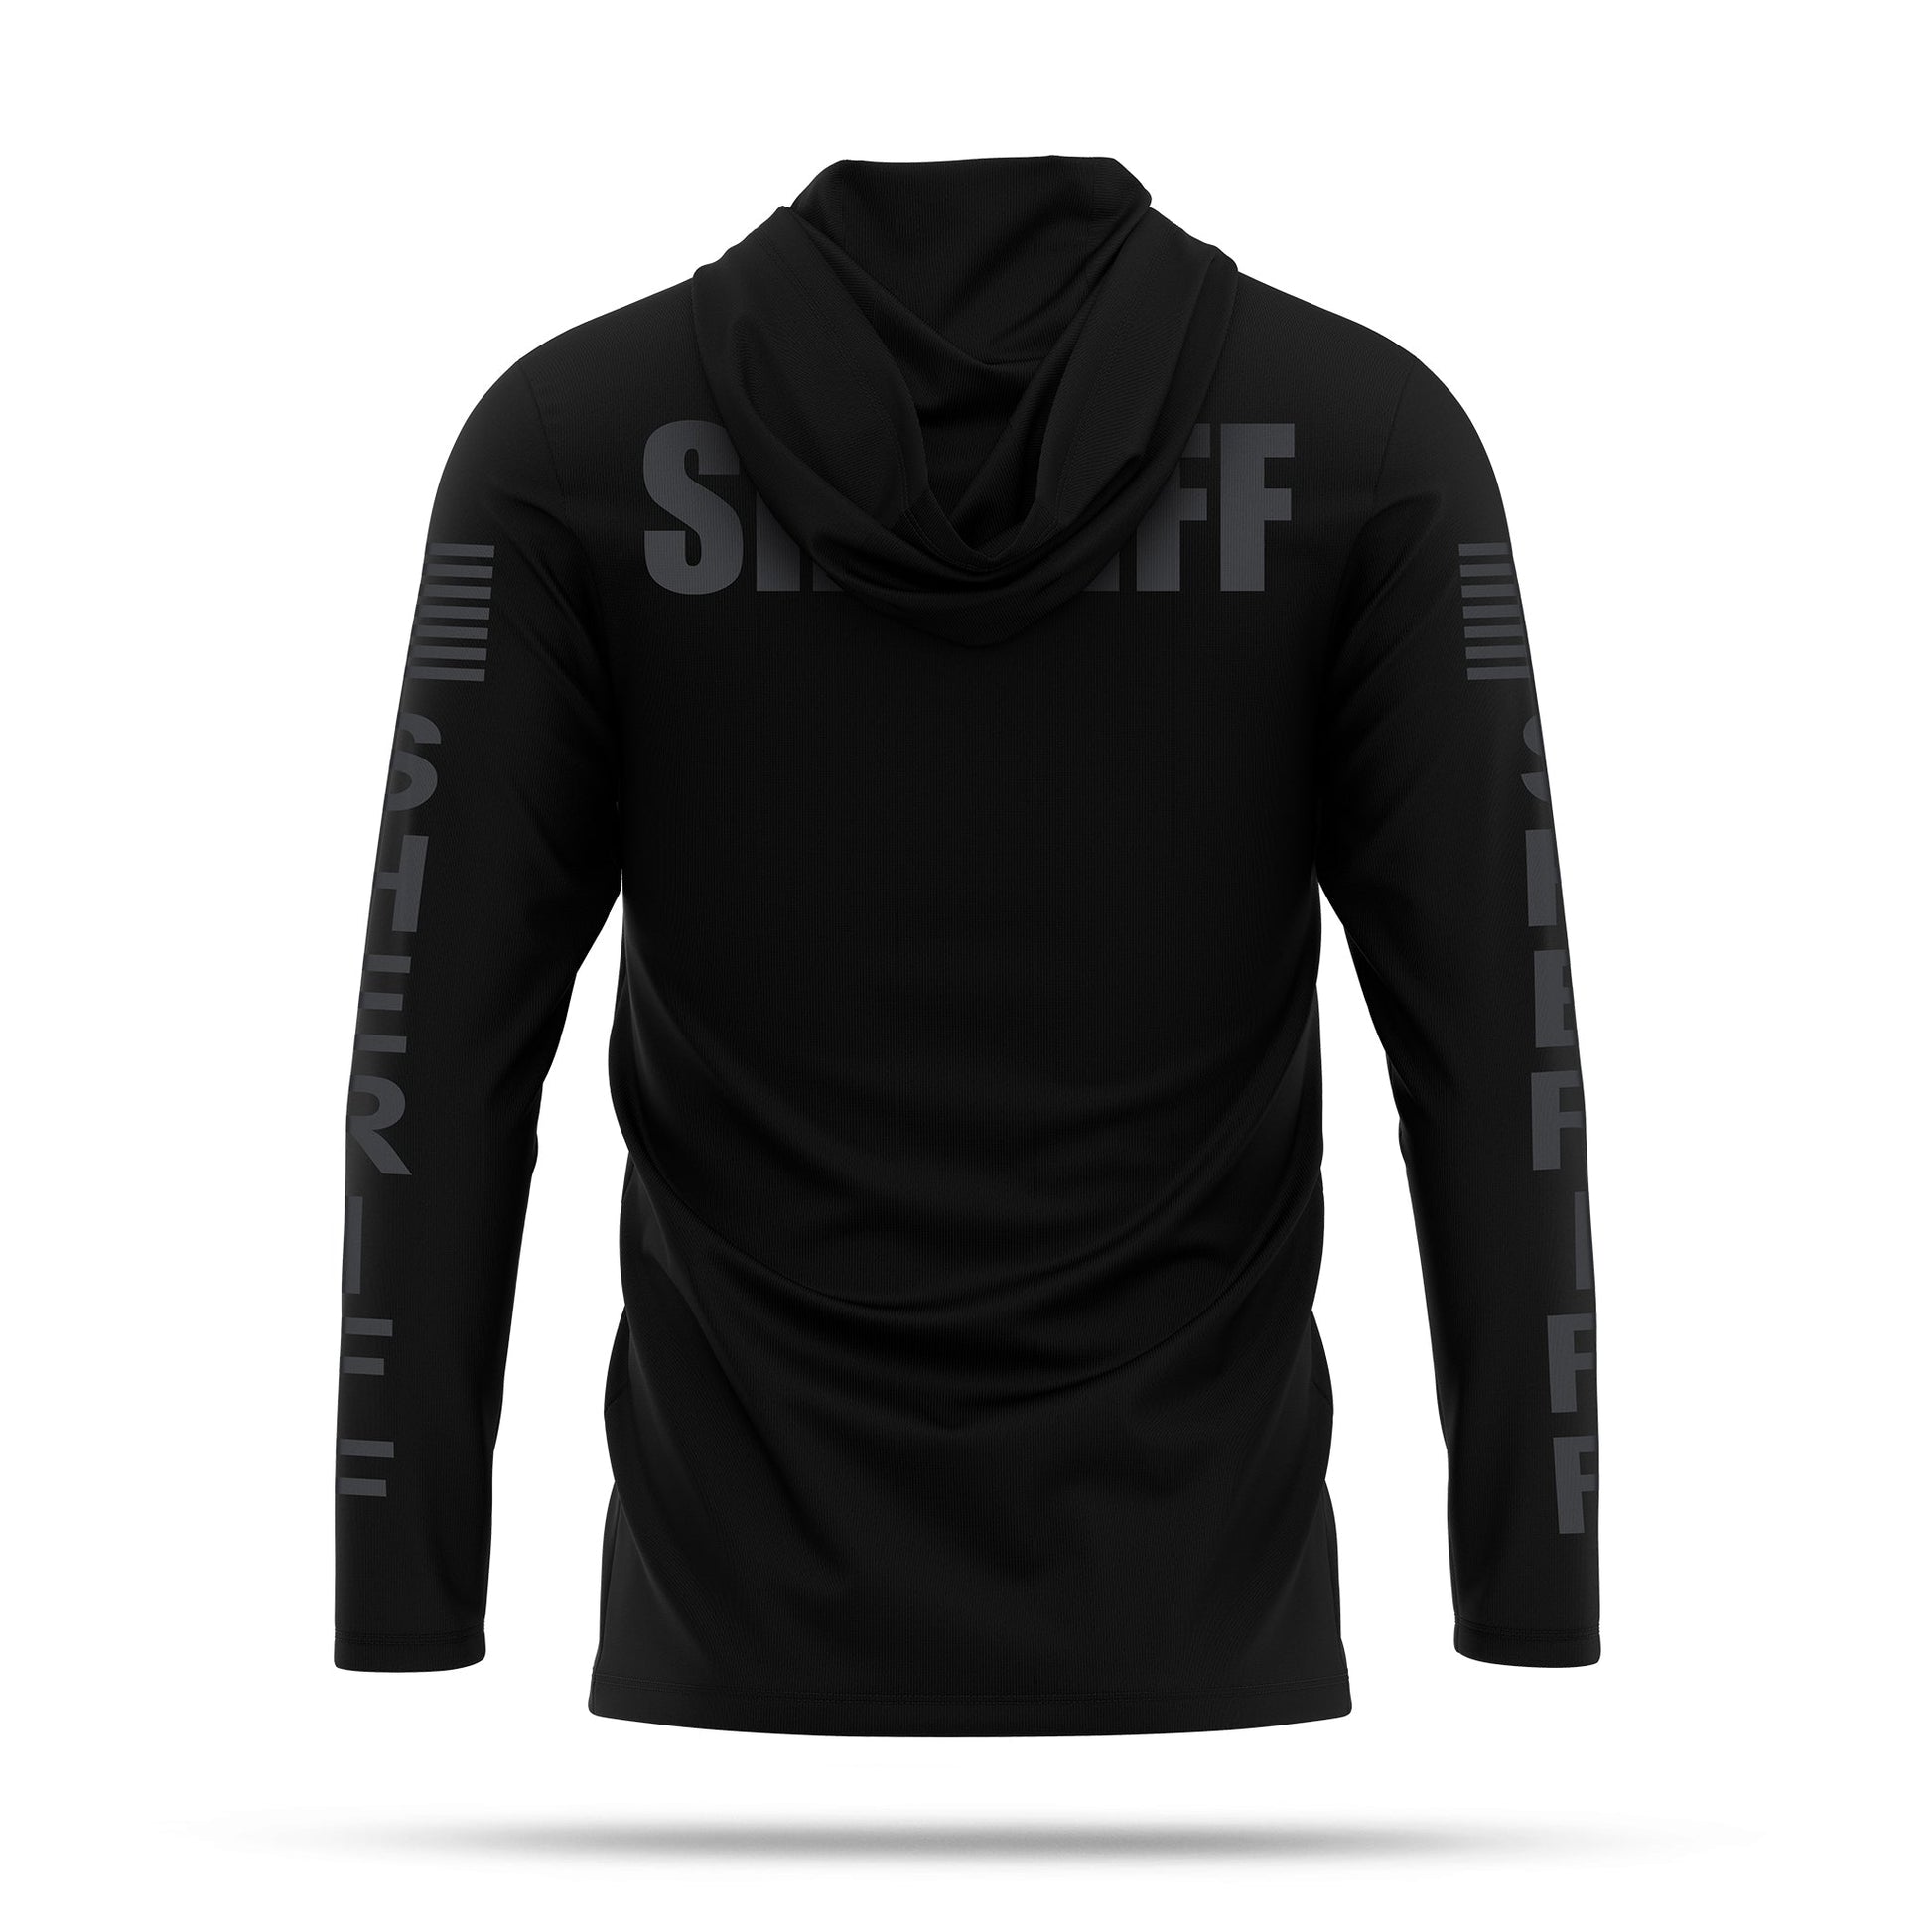 [SHERIFF] Men's Performance Hooded Long Sleeve [BLK/BLK]-13 Fifty Apparel